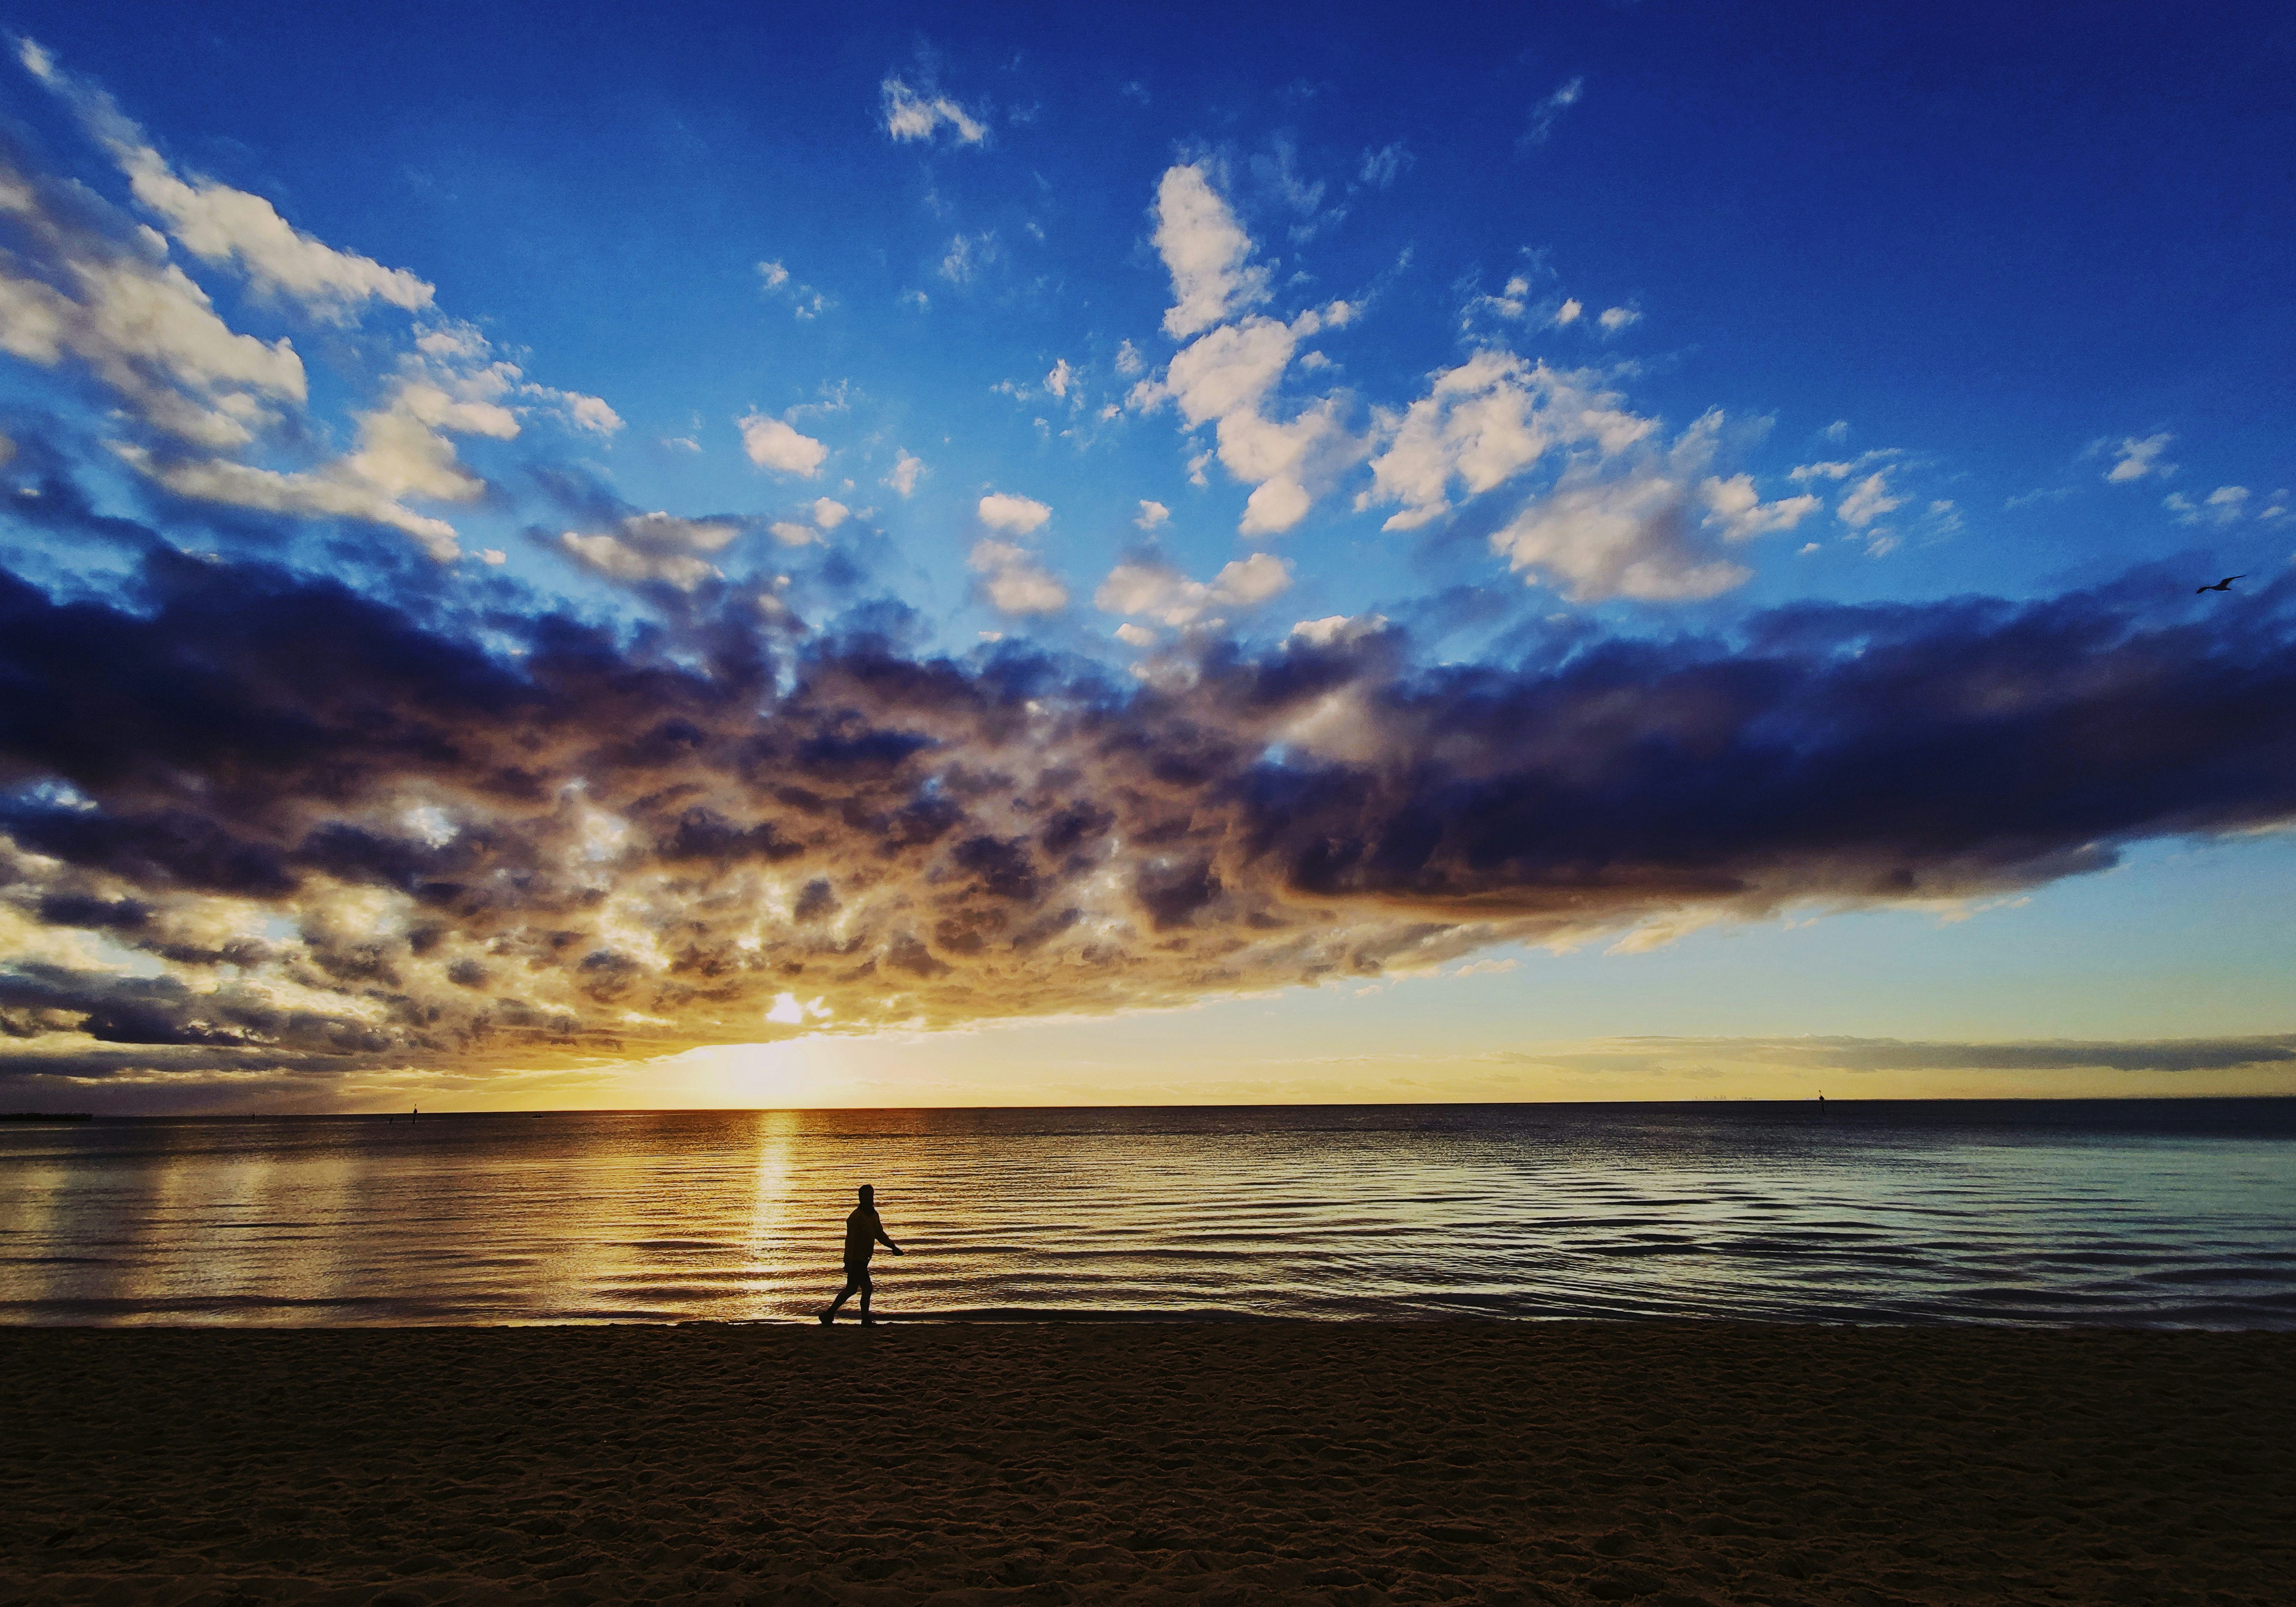 silhouette of person walking on beach during sunset